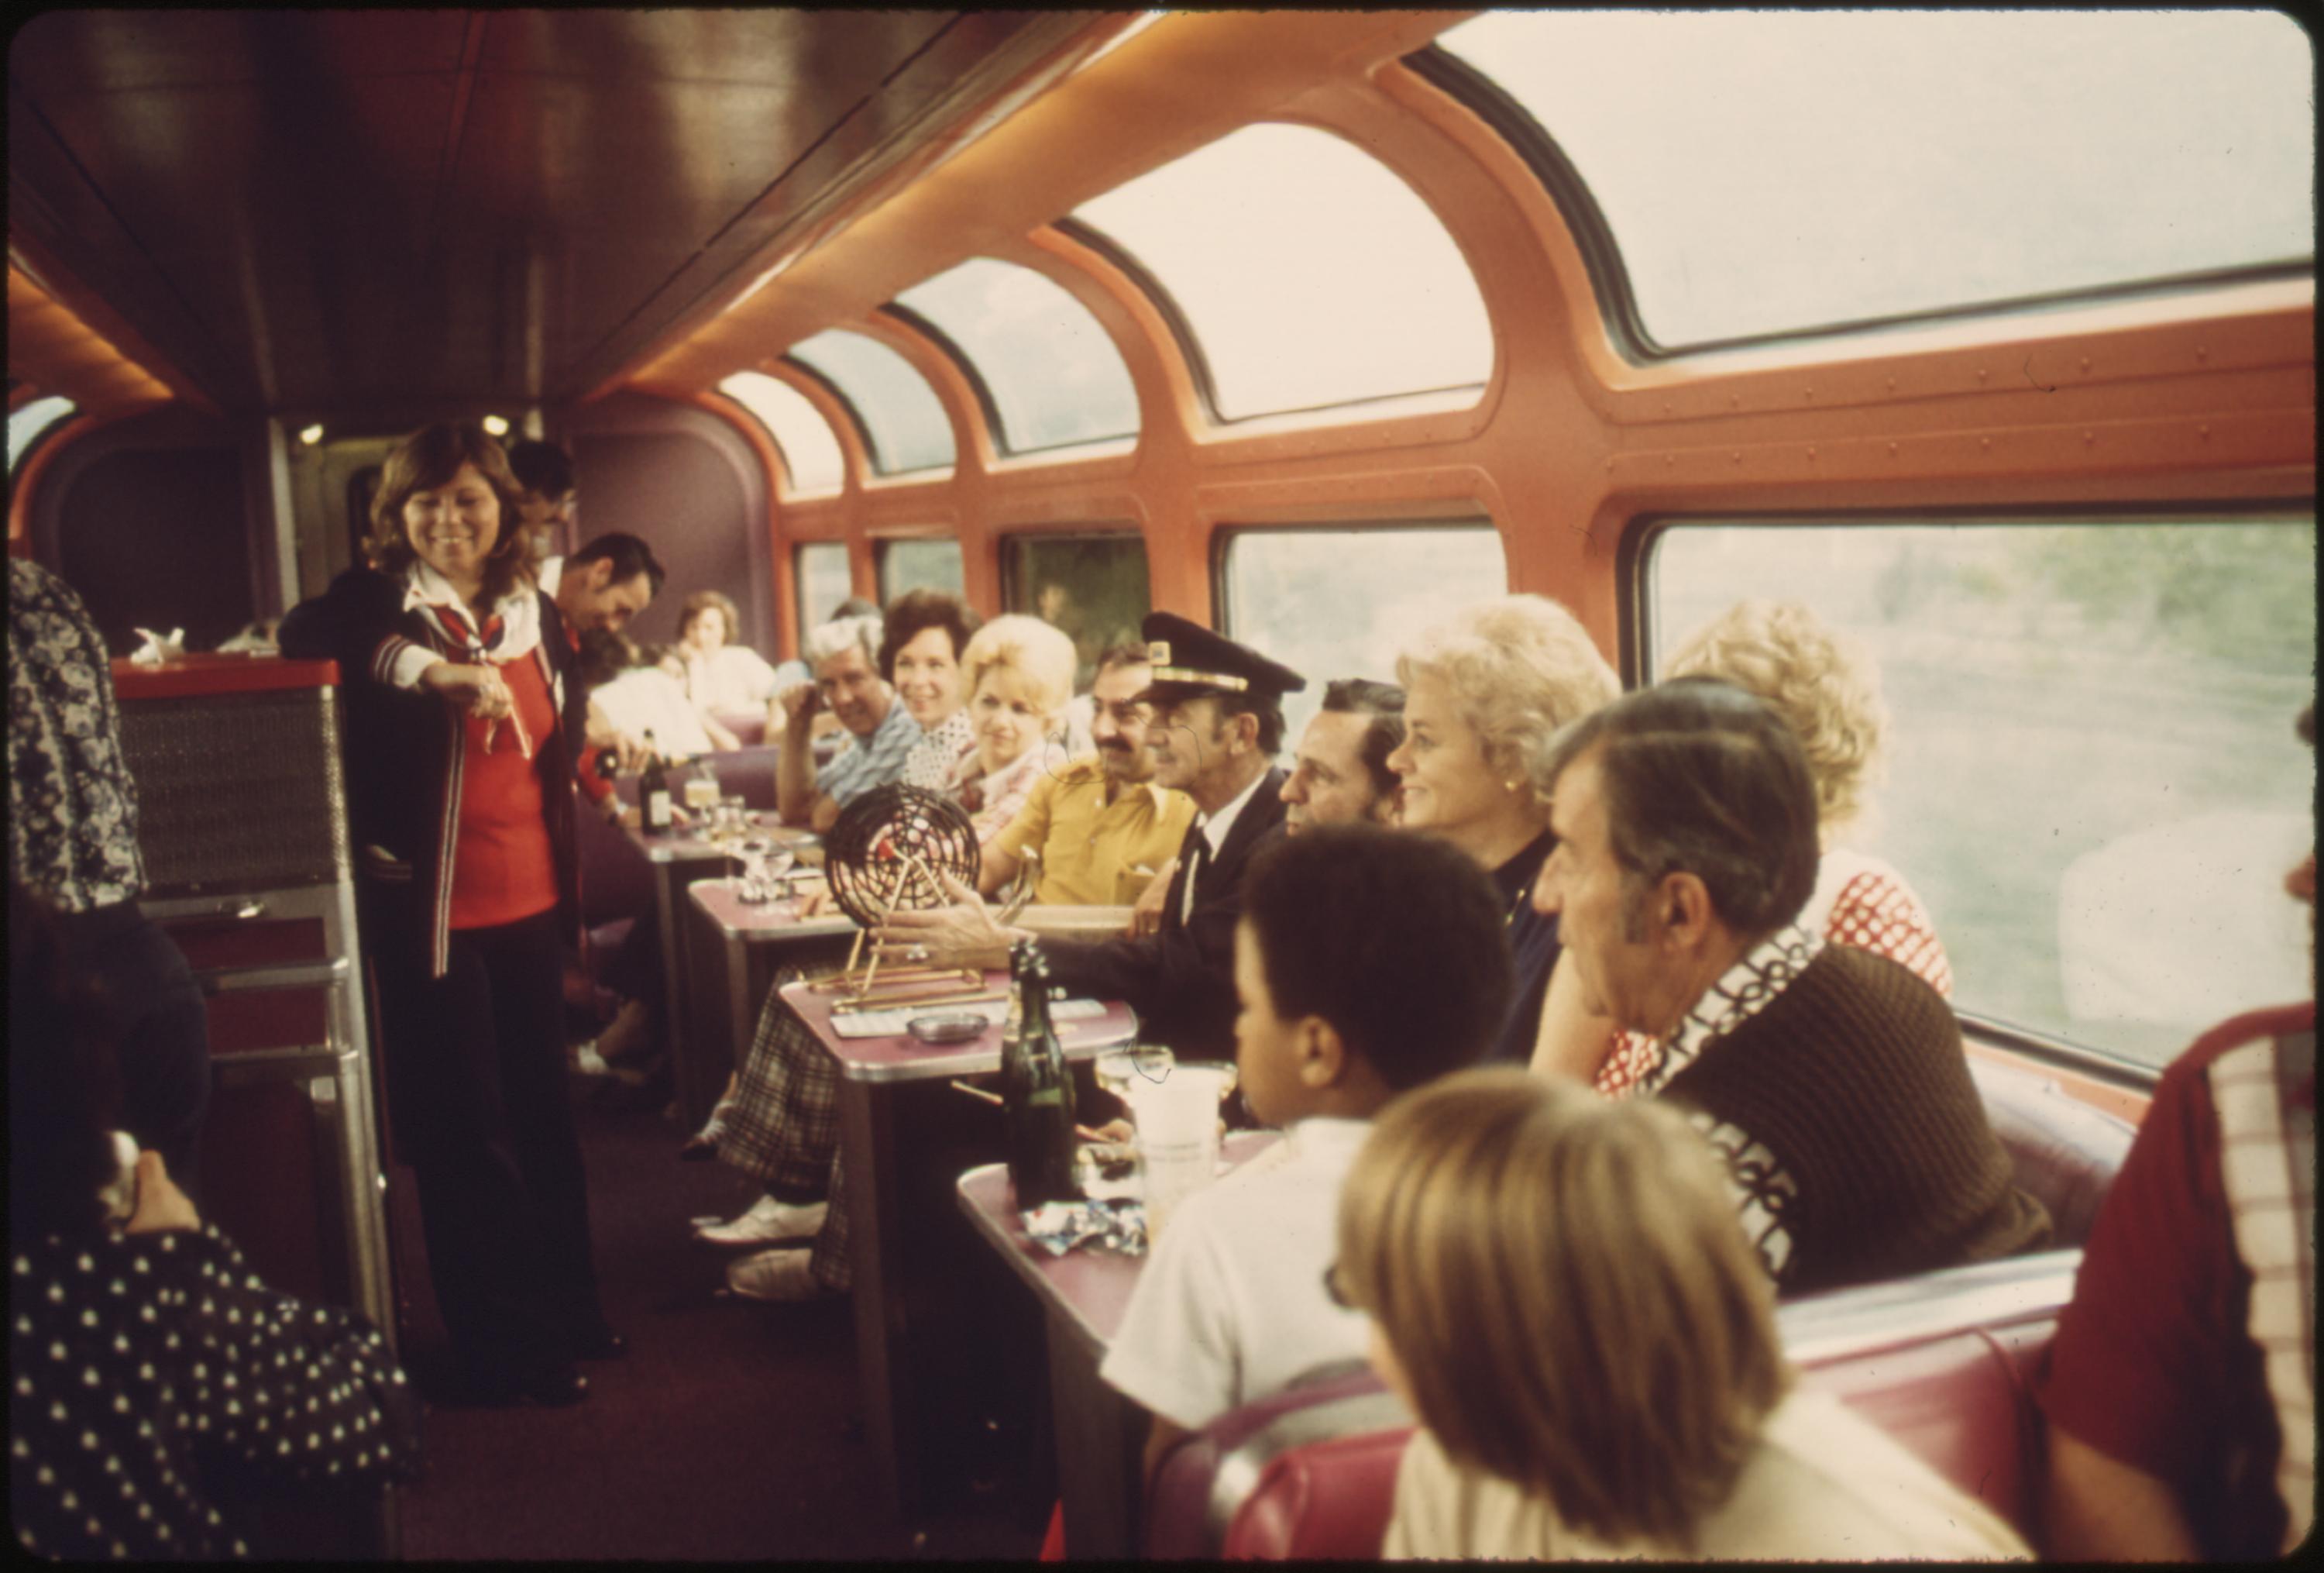 Bingo is available for passengers who wish to play in the lounge car of the Southwest Limited enroute between Albuquerque New Mexico, and Dodge City, Kansas, June 1974